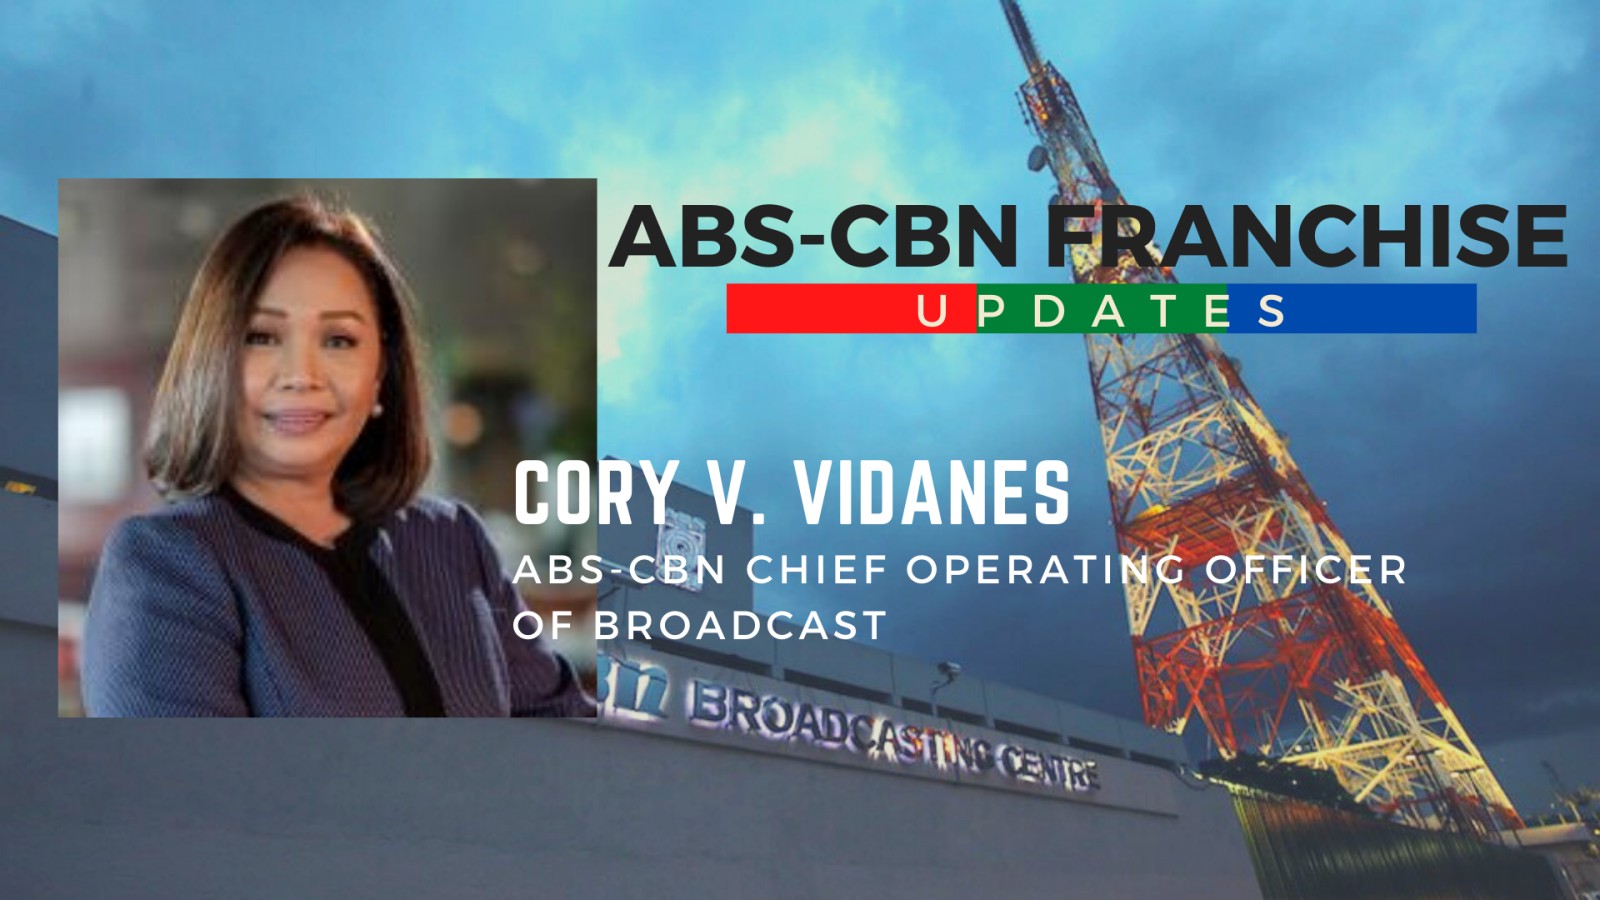 ABS-CBN will continue to be a responsible content producer